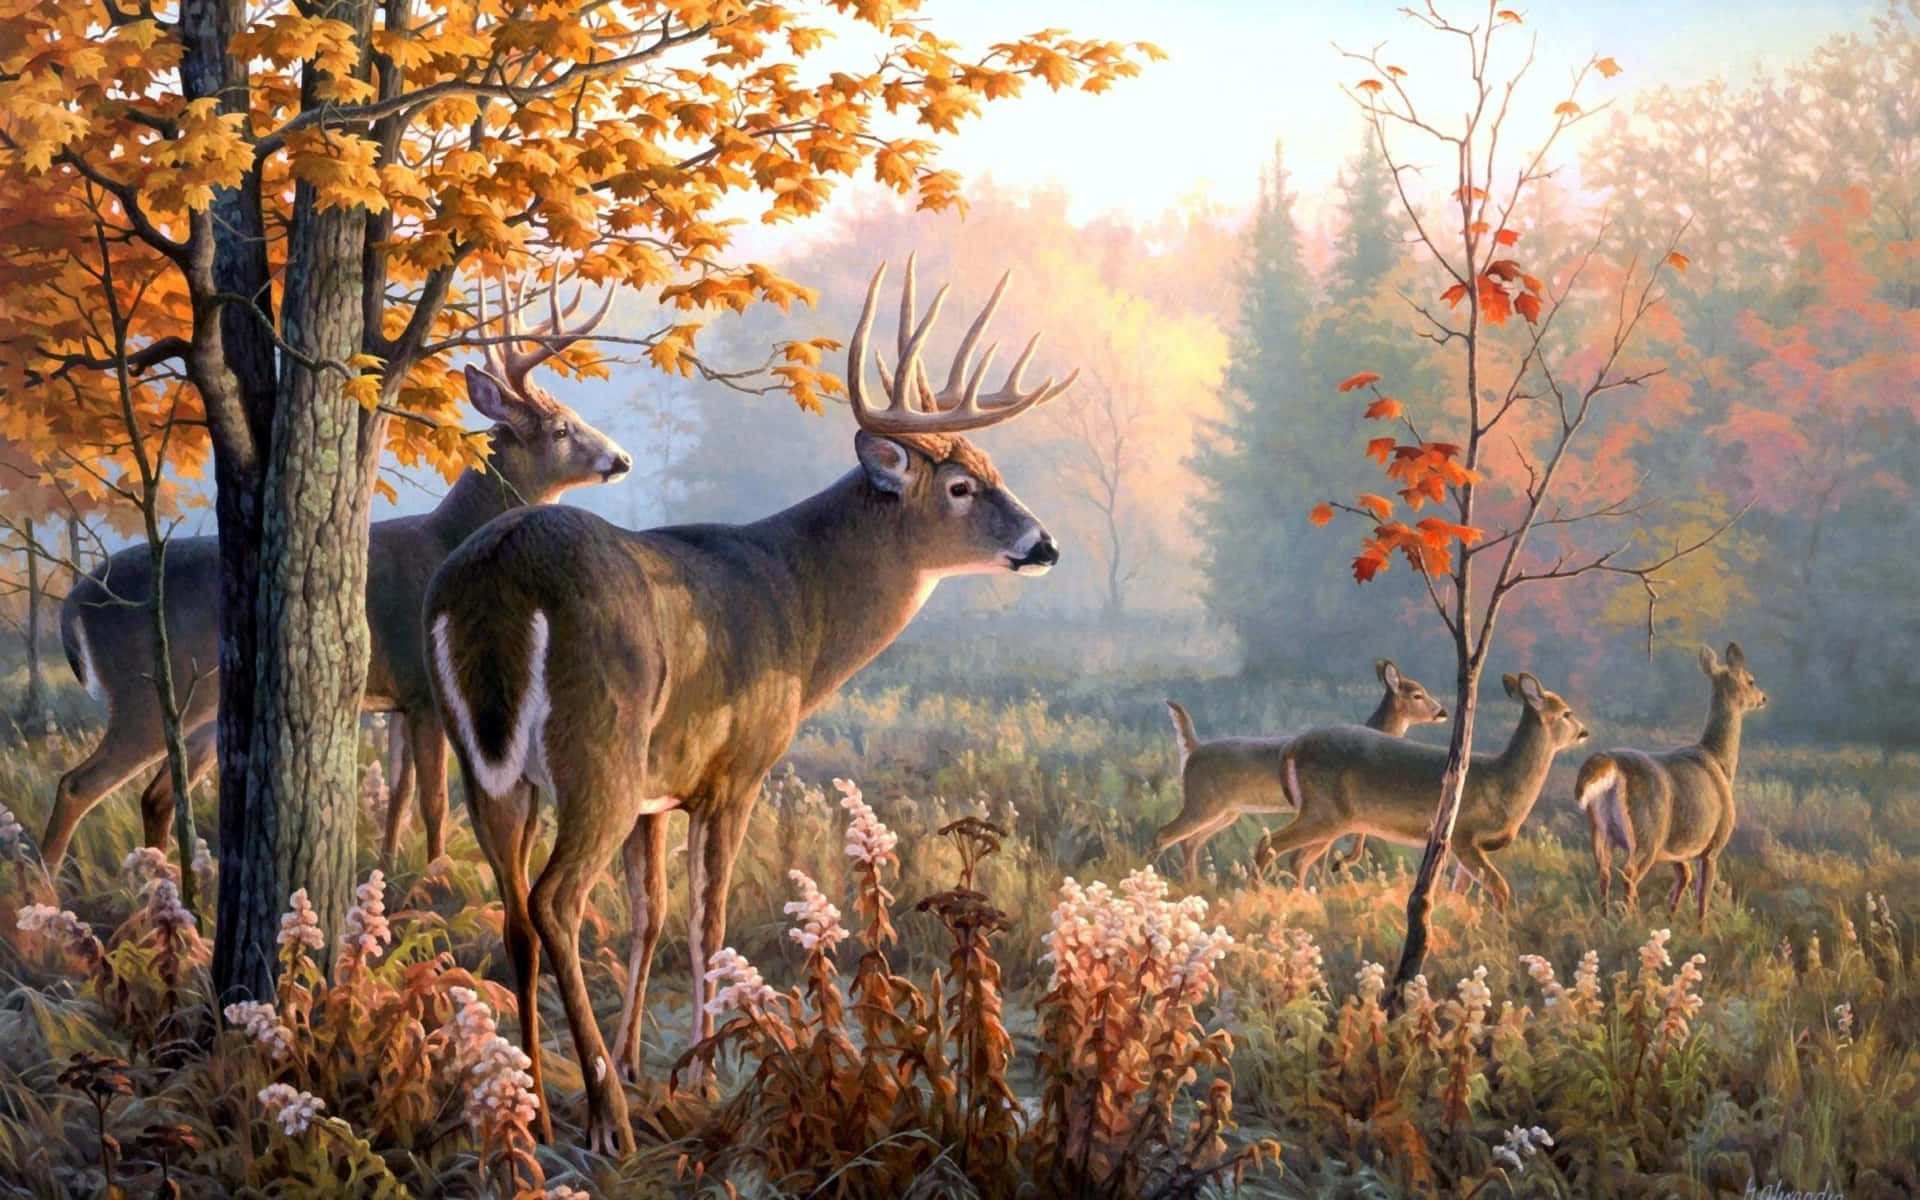 A Majestic and Refined Deer Grazing in the Field Wallpaper